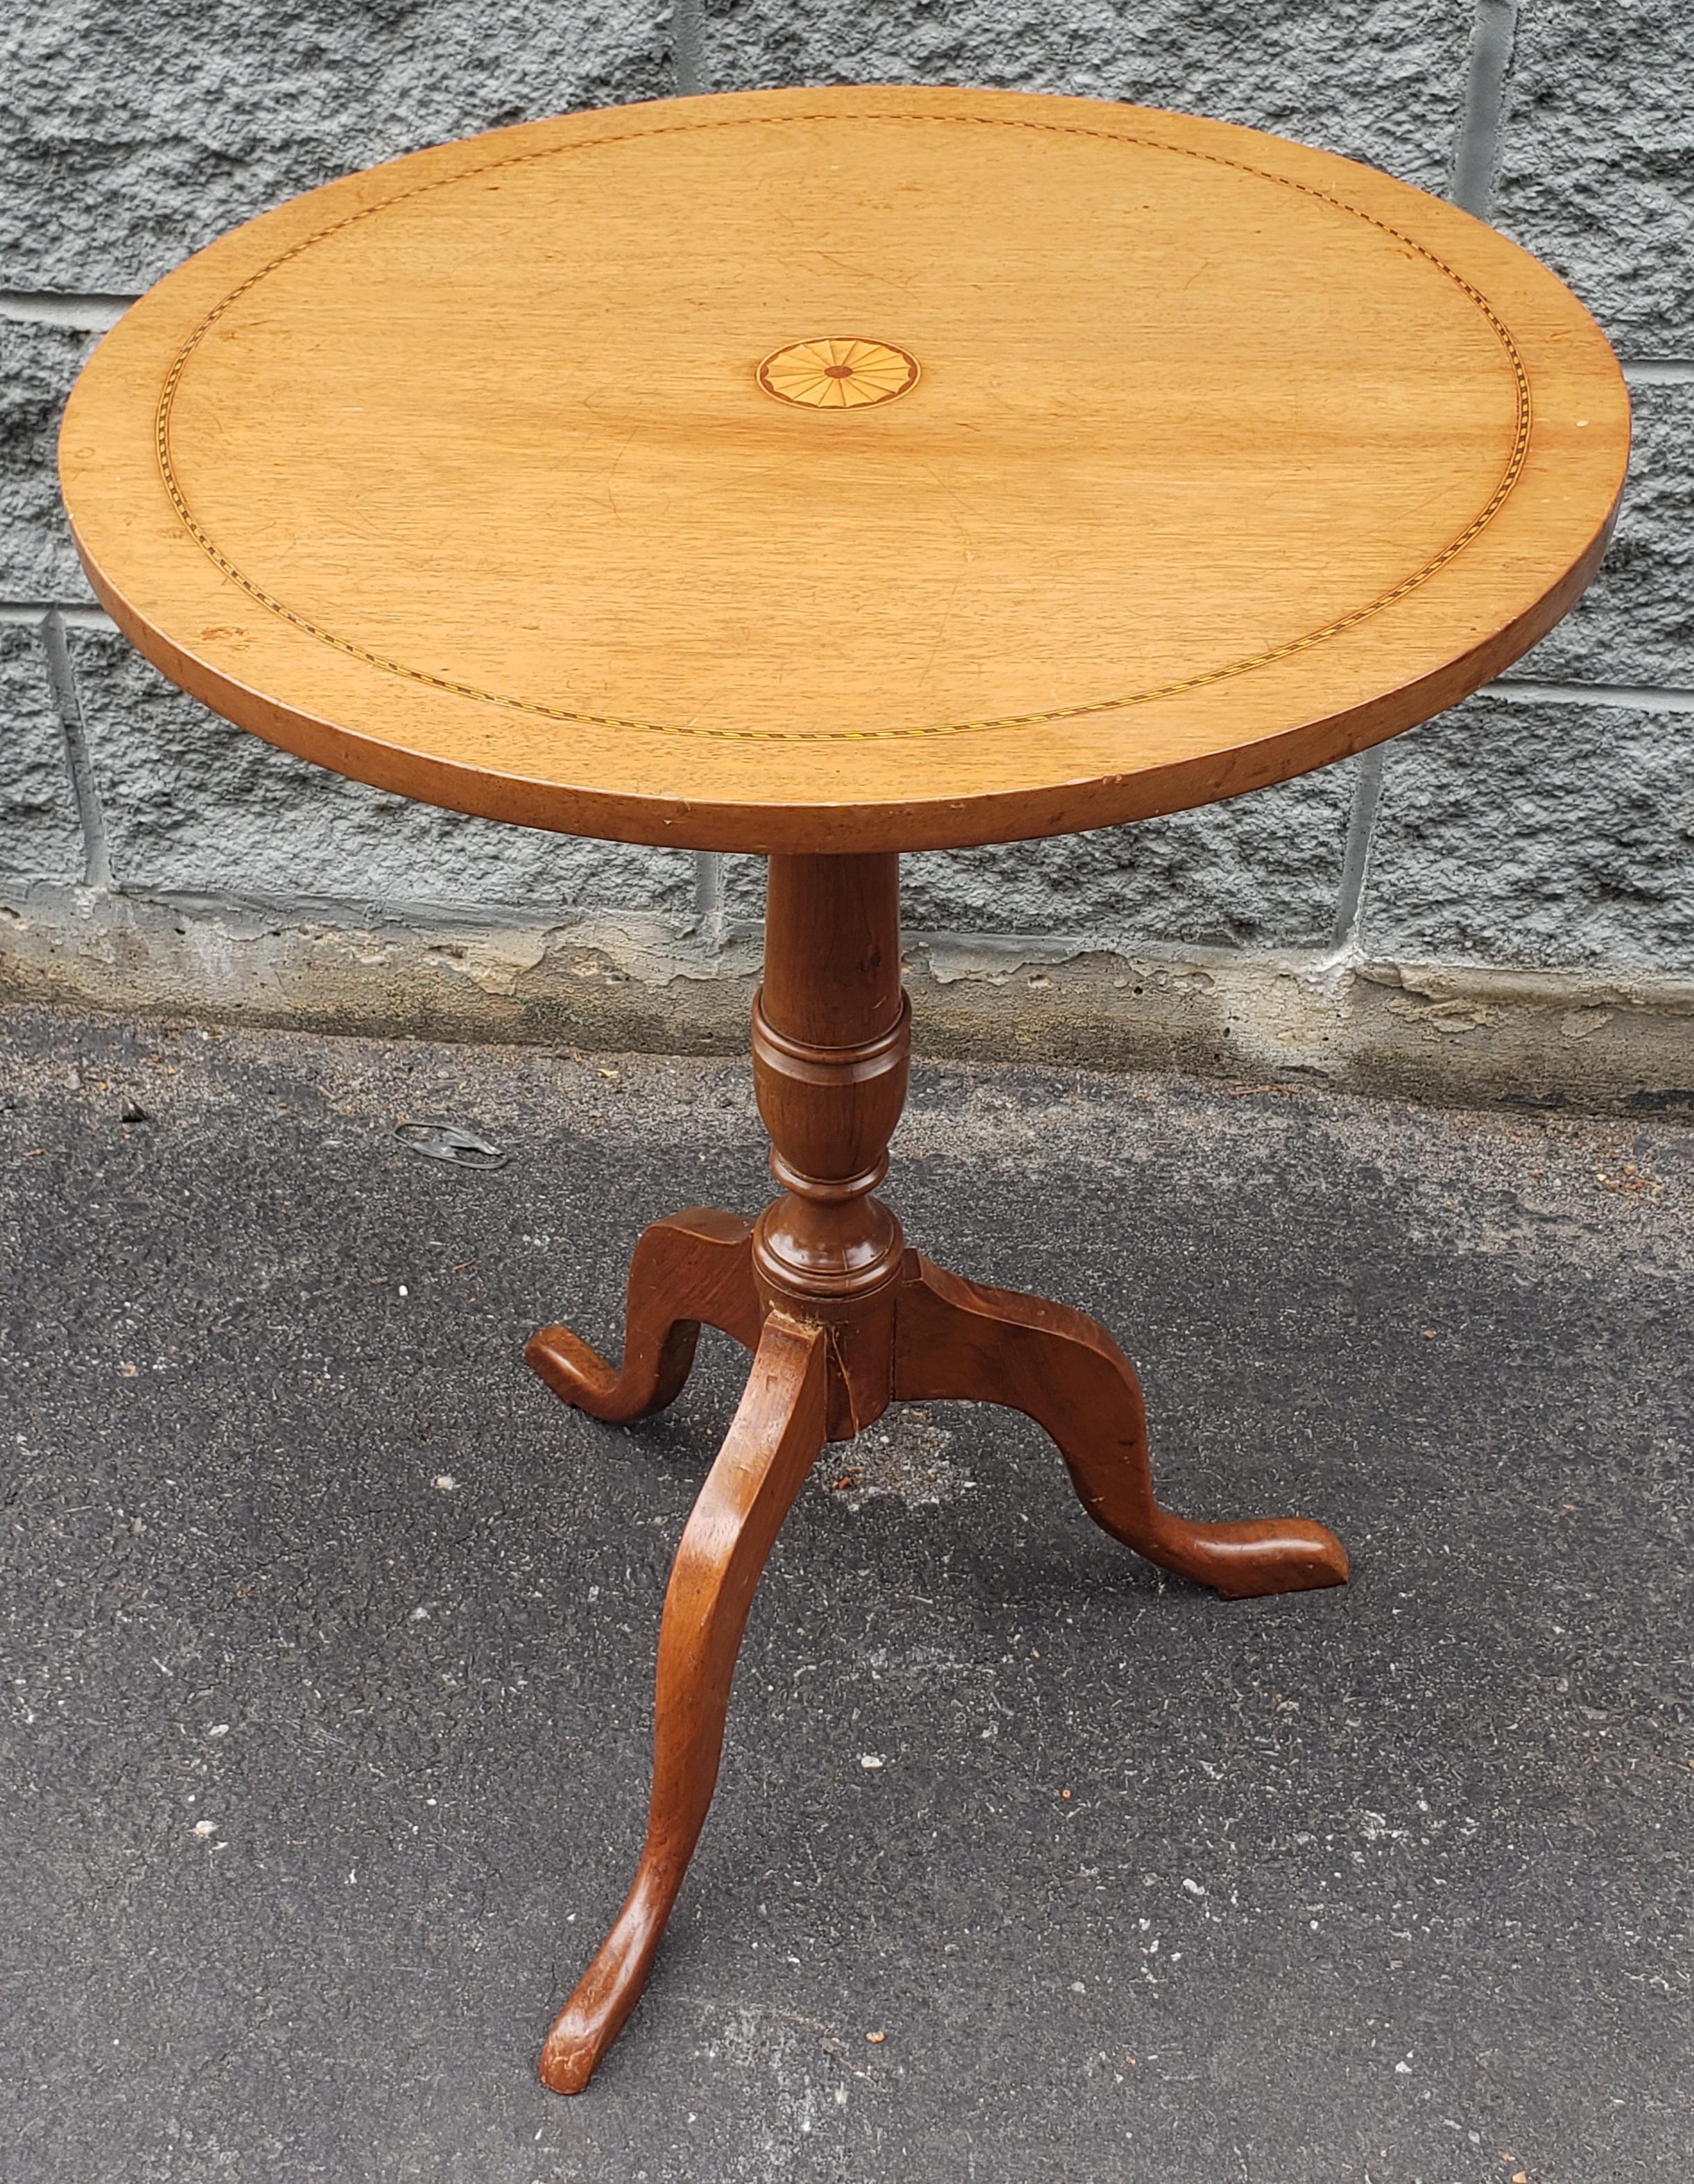 1940s Mahogany Inlaid Tilt Top Table In Good Condition For Sale In Germantown, MD